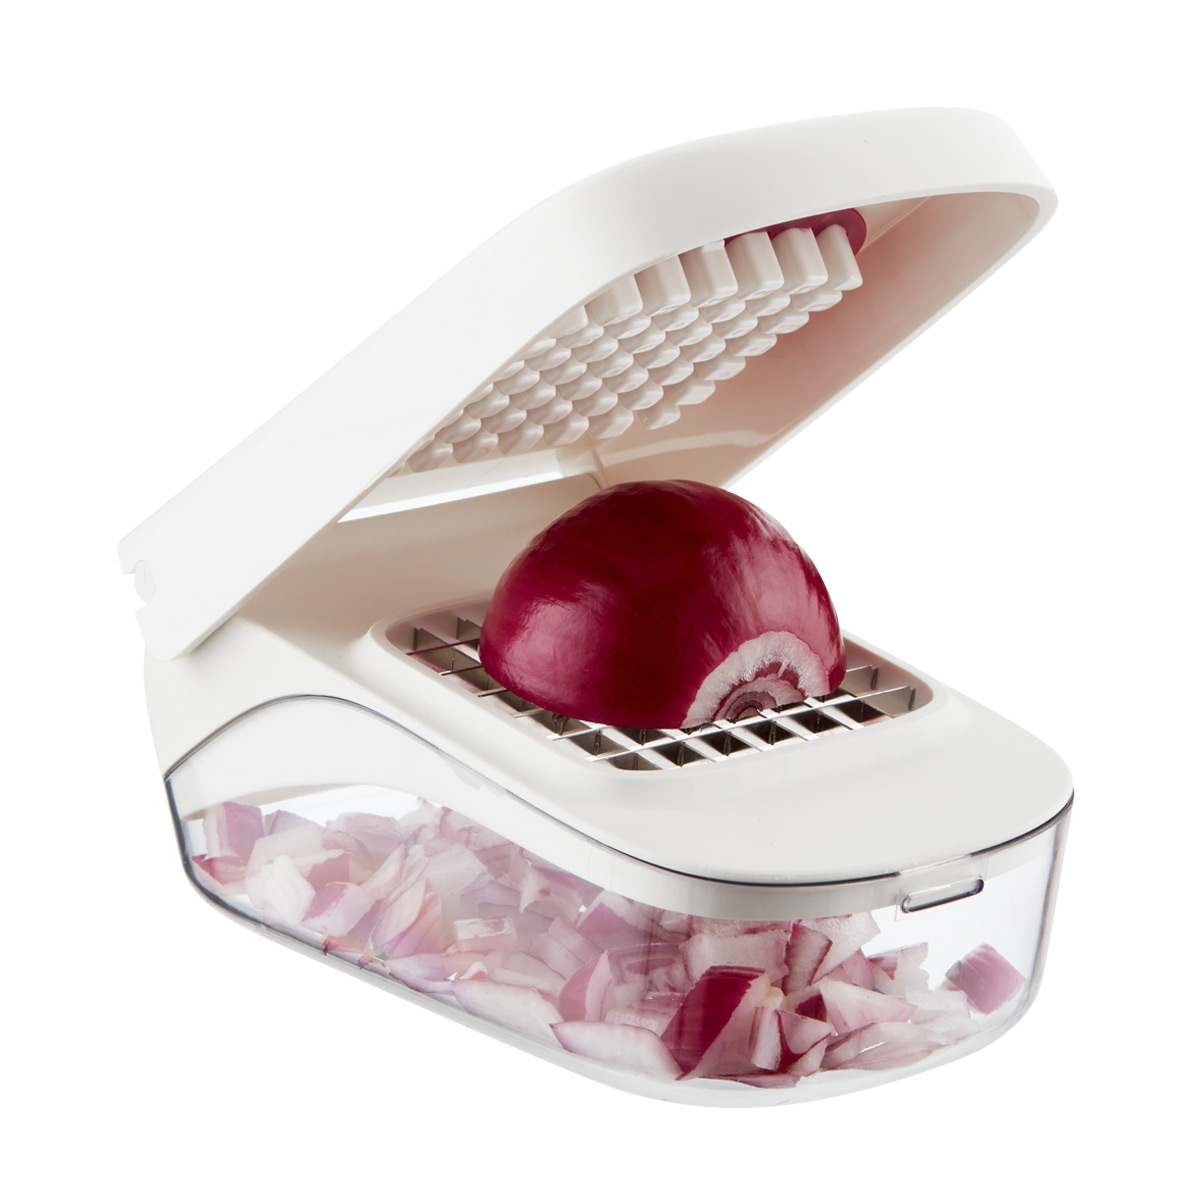 https://www.containerstore.com/catalogimages/330033/10073553-oxo-vegetable-chopper.jpg